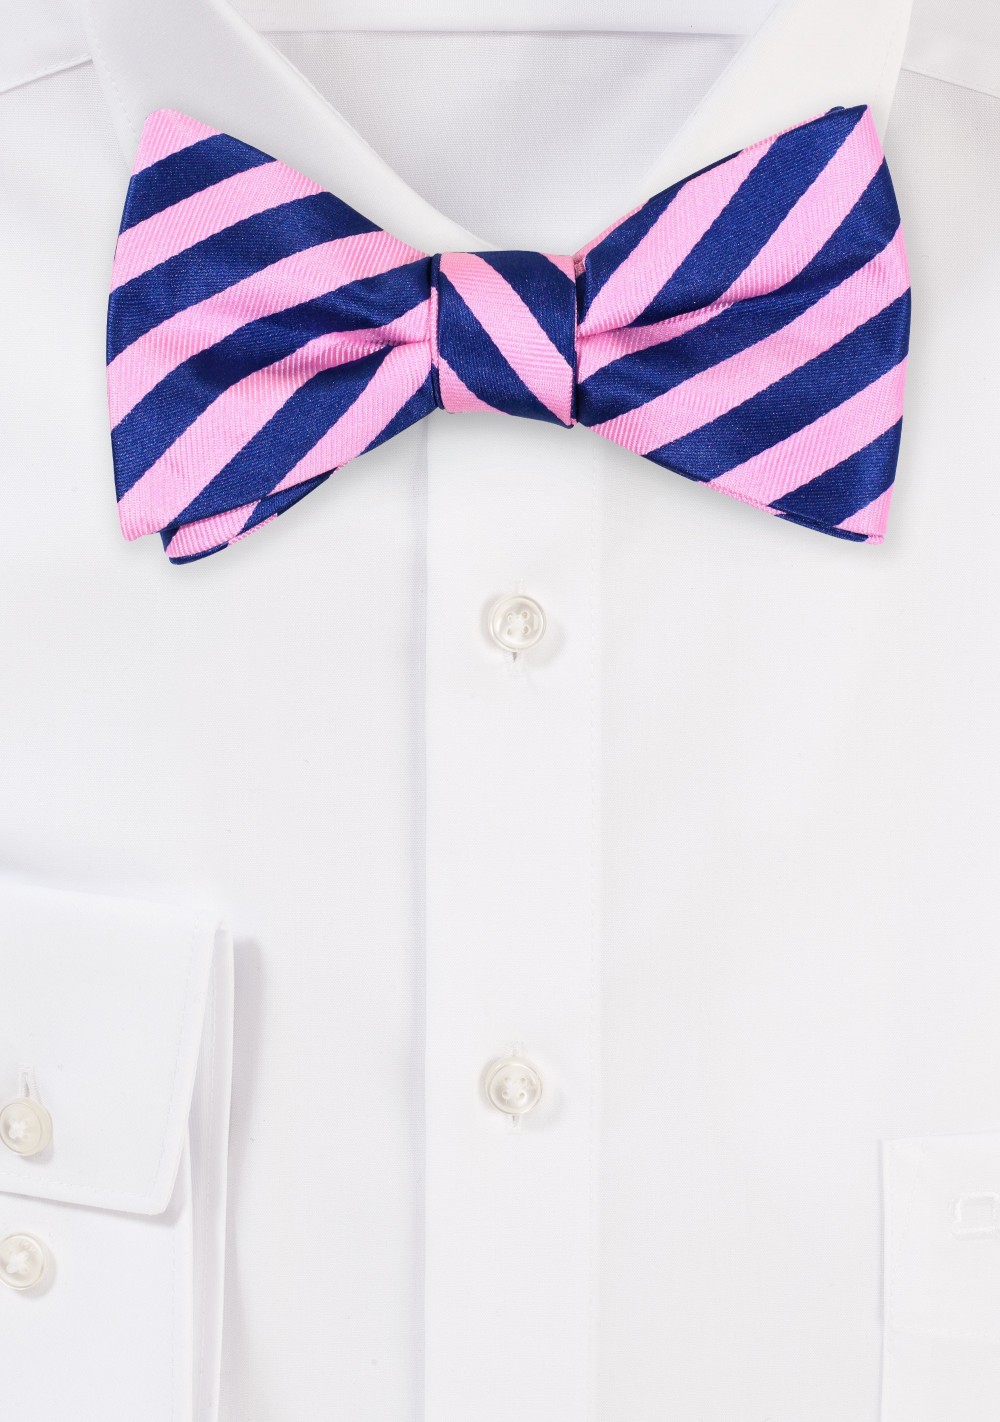 Satin Bowtie in Pink and Blue Stripe